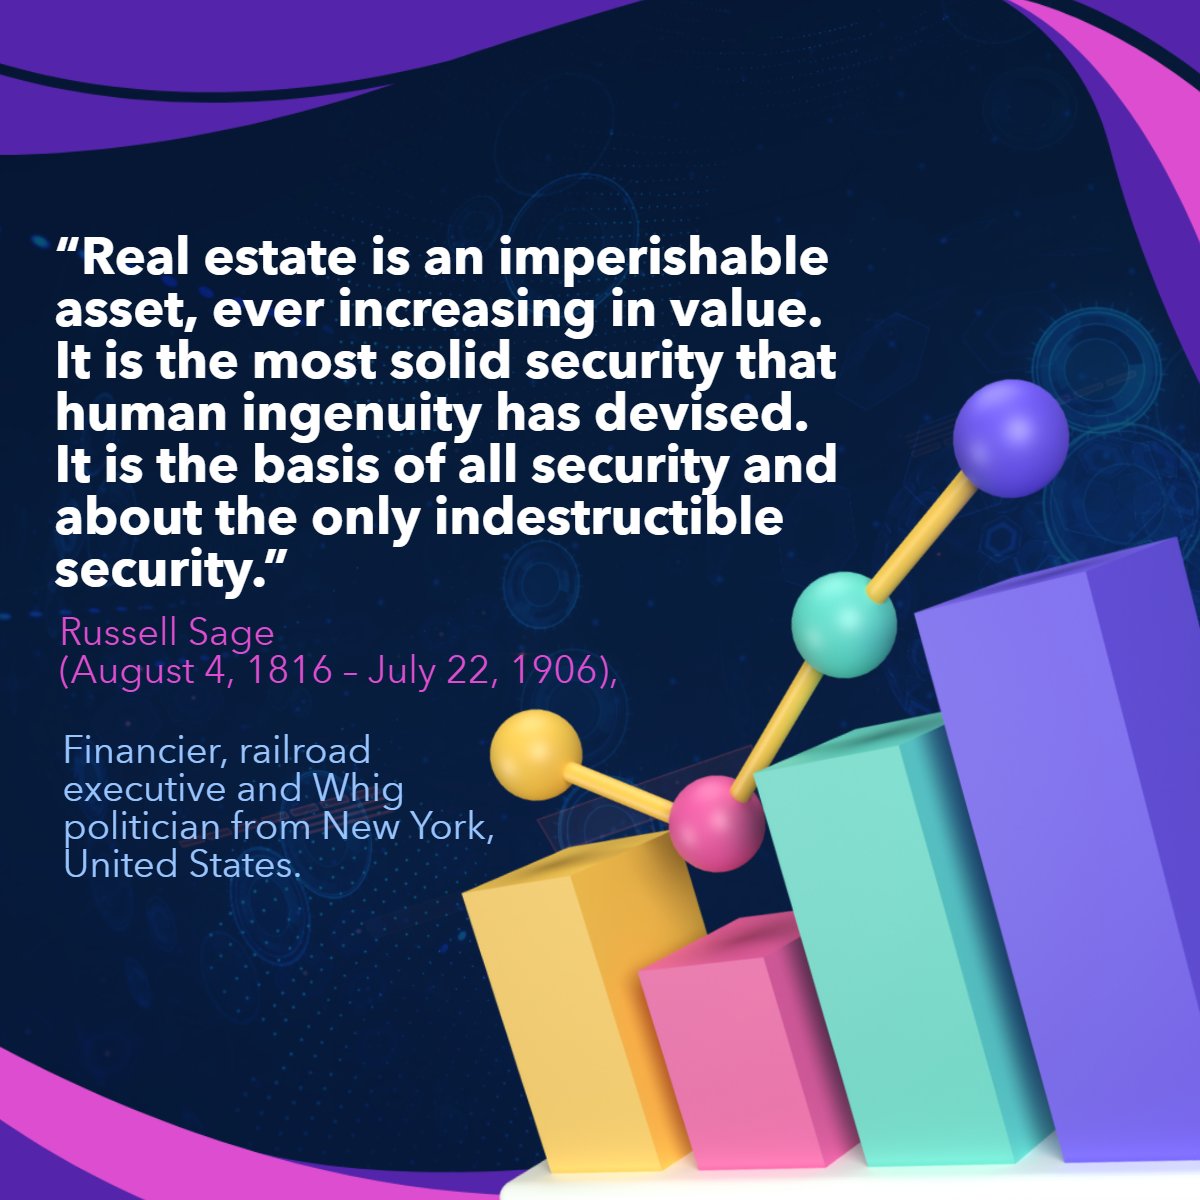 'Real estate is an imperishable asset, ever-increasing in value. It is the most solid security that human ingenuity has devised. It is the basis of all security and about the only indestructible security.”
— Russell Sage 📖

#quoteoftheday #quotestagram #lifequotes